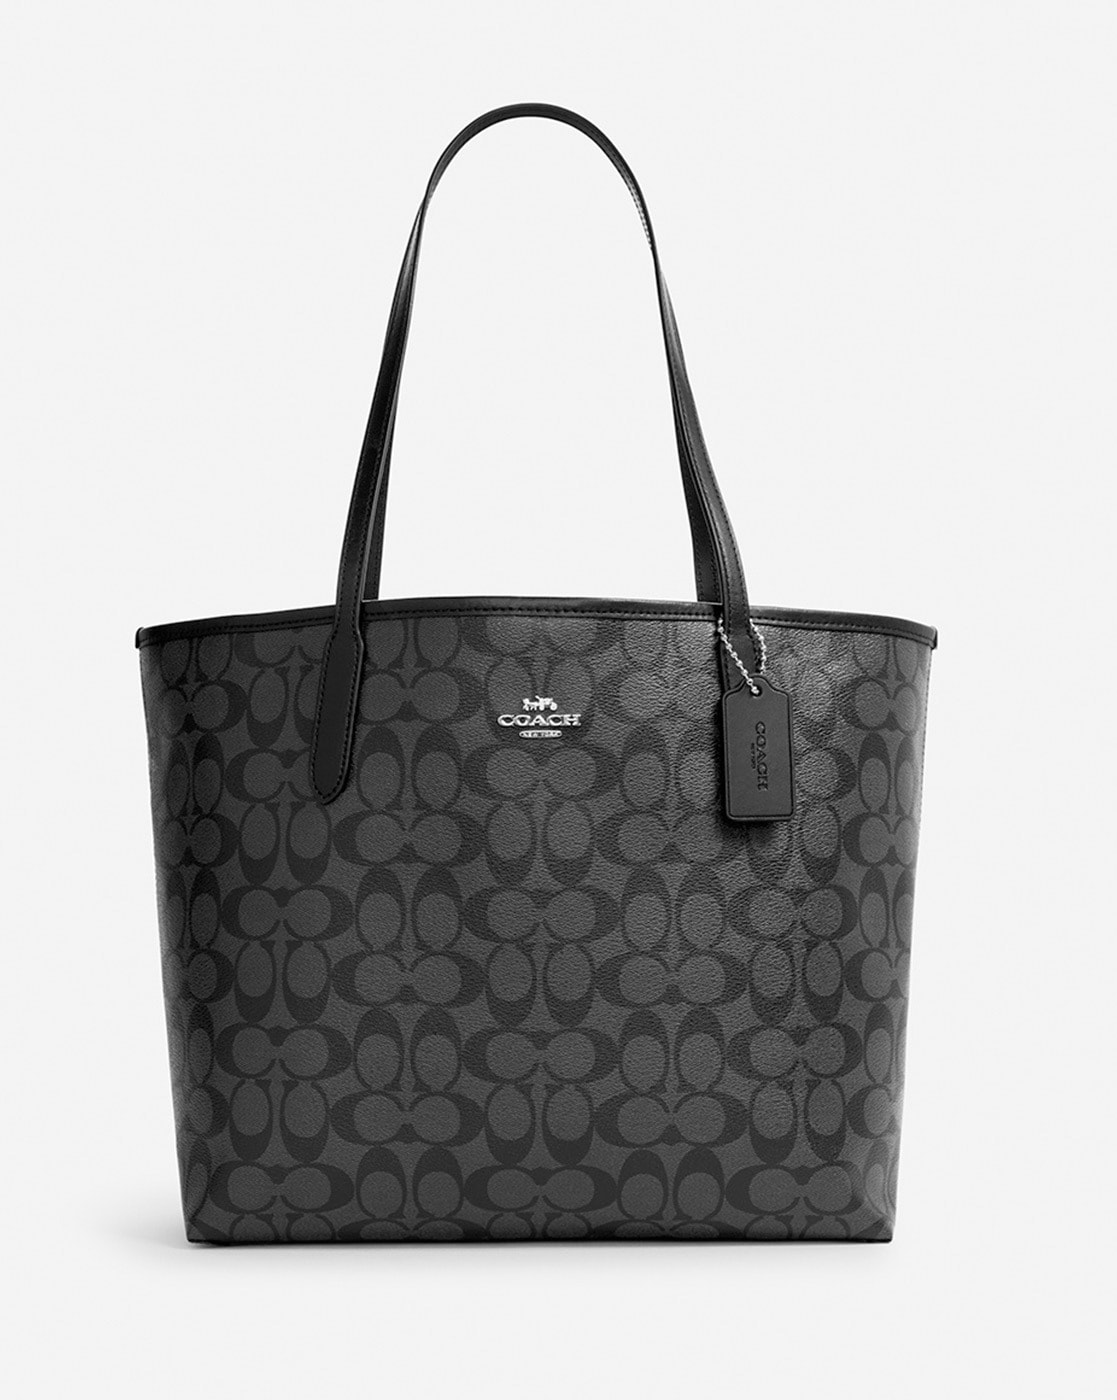 i got one of the biggest Coach tote bags there is : r/handbags